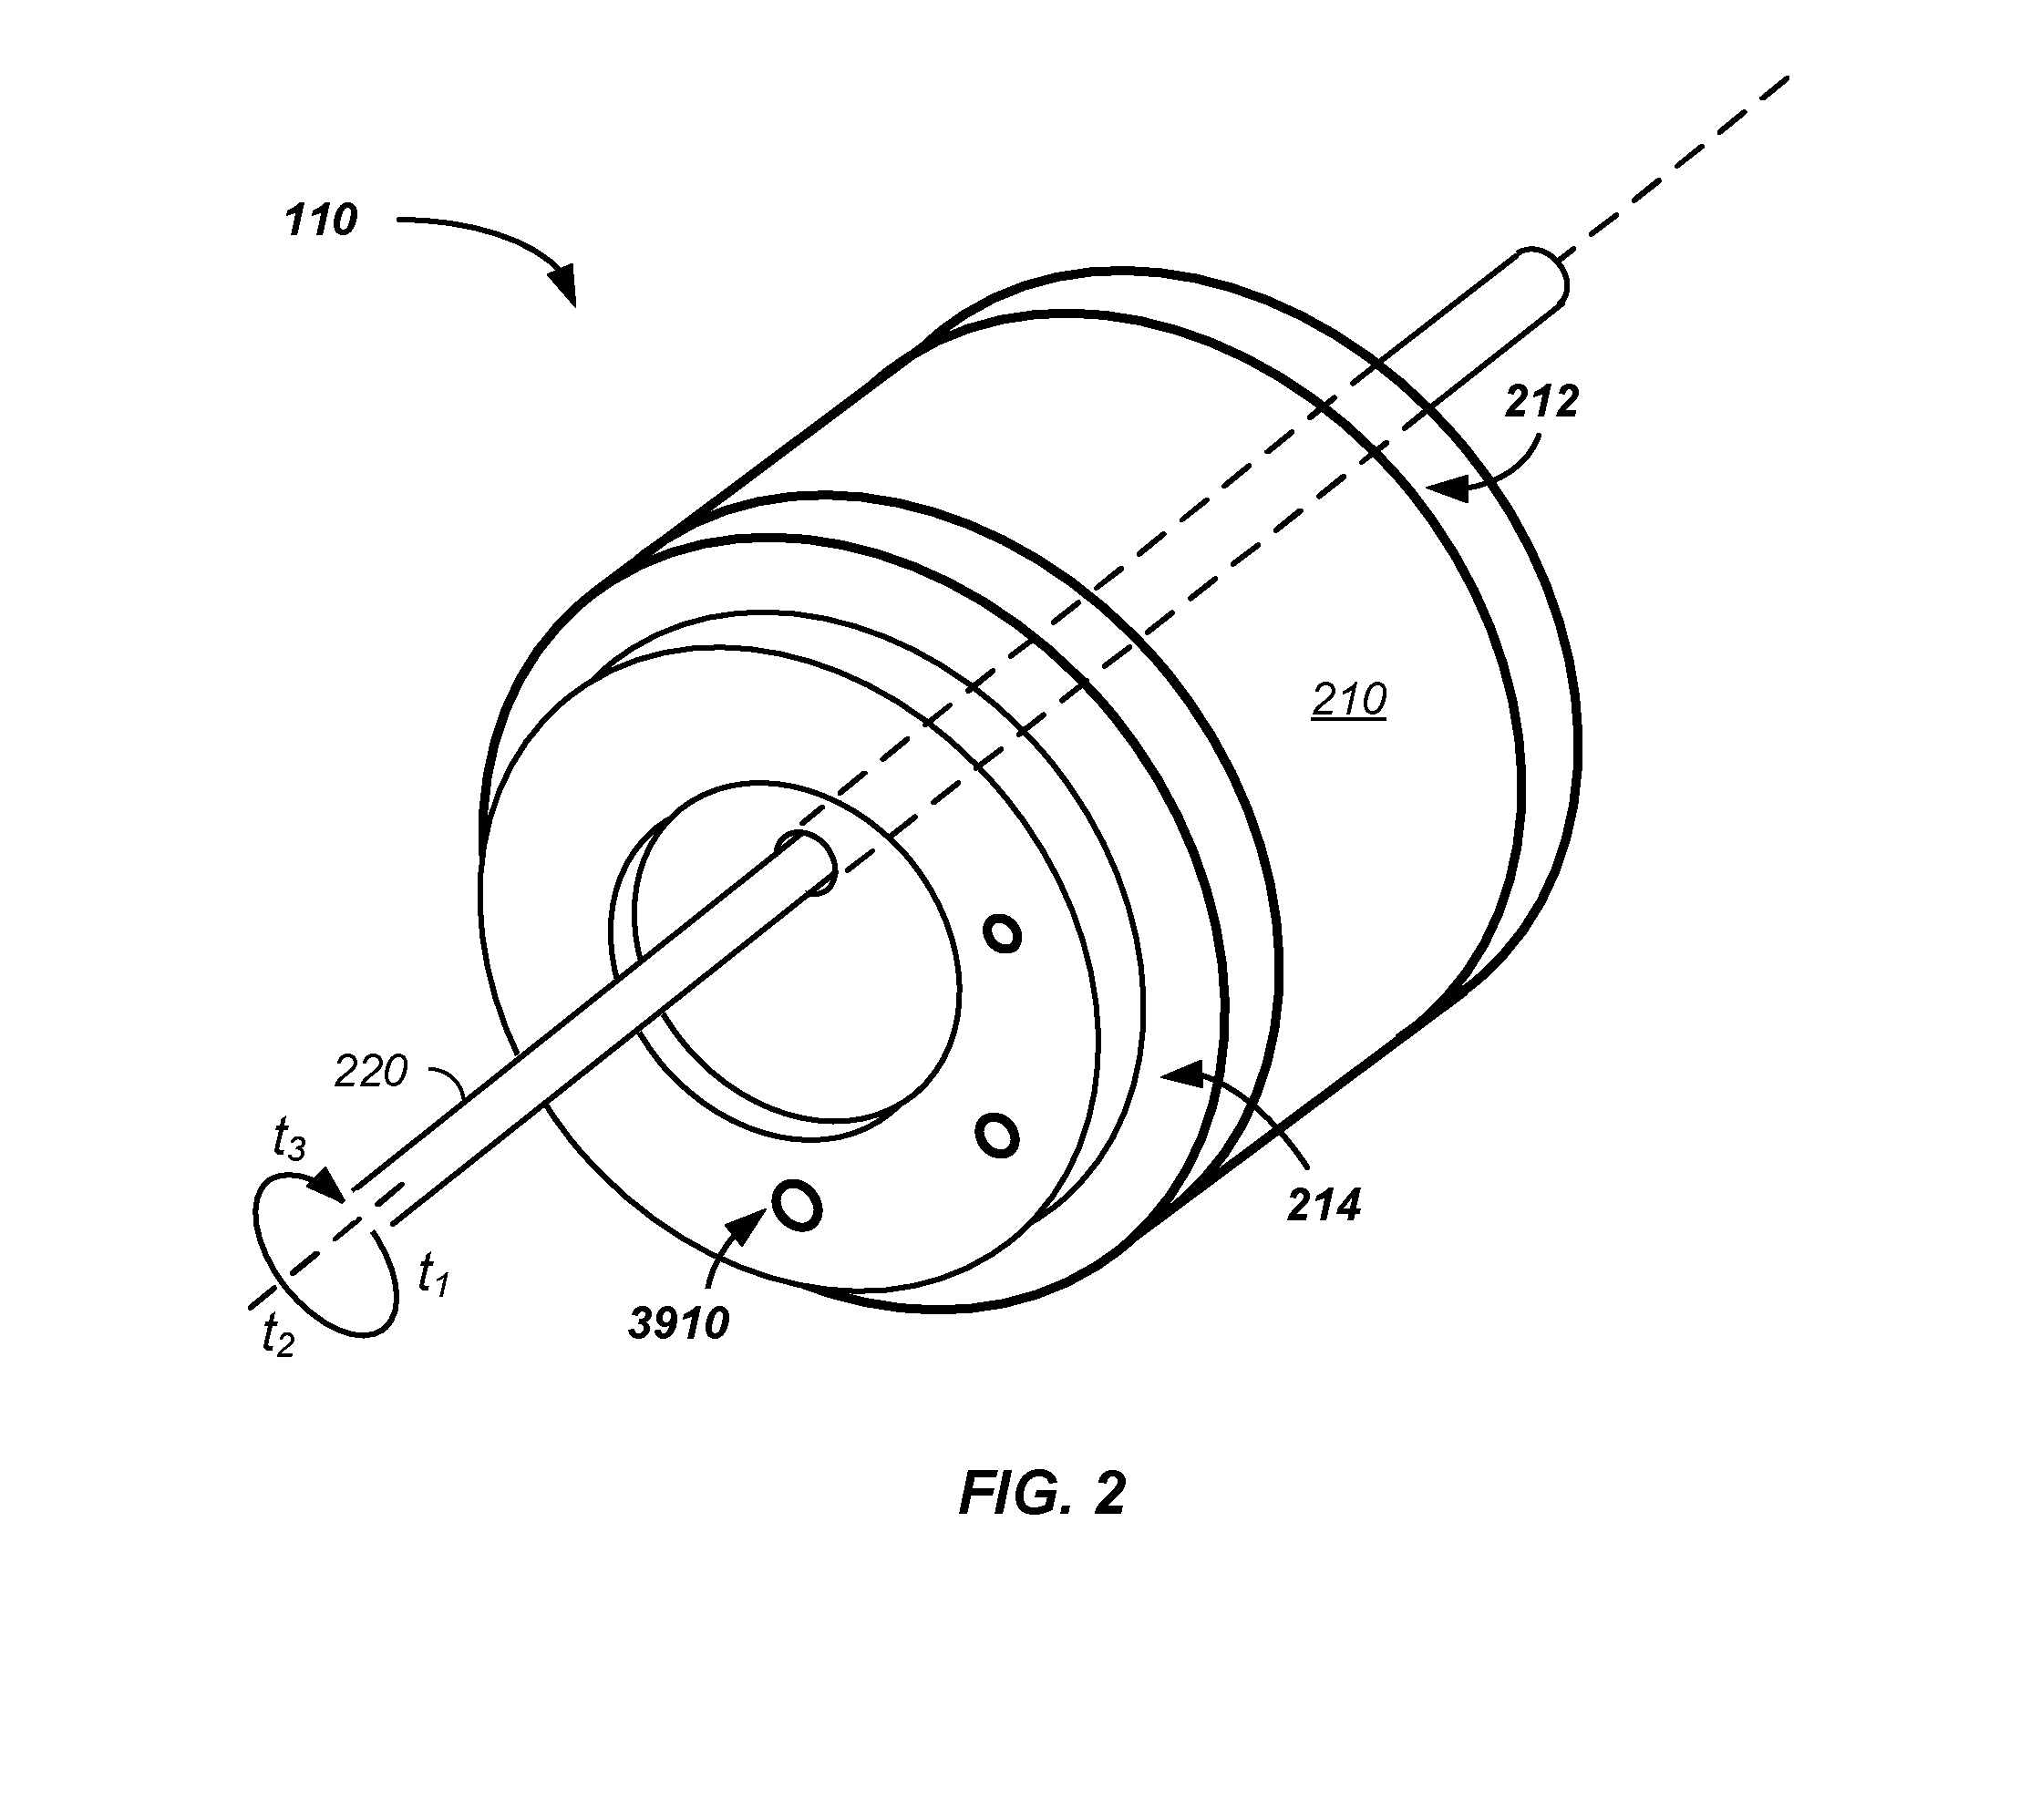 Multi-injection port rotary engine apparatus and method of use thereof